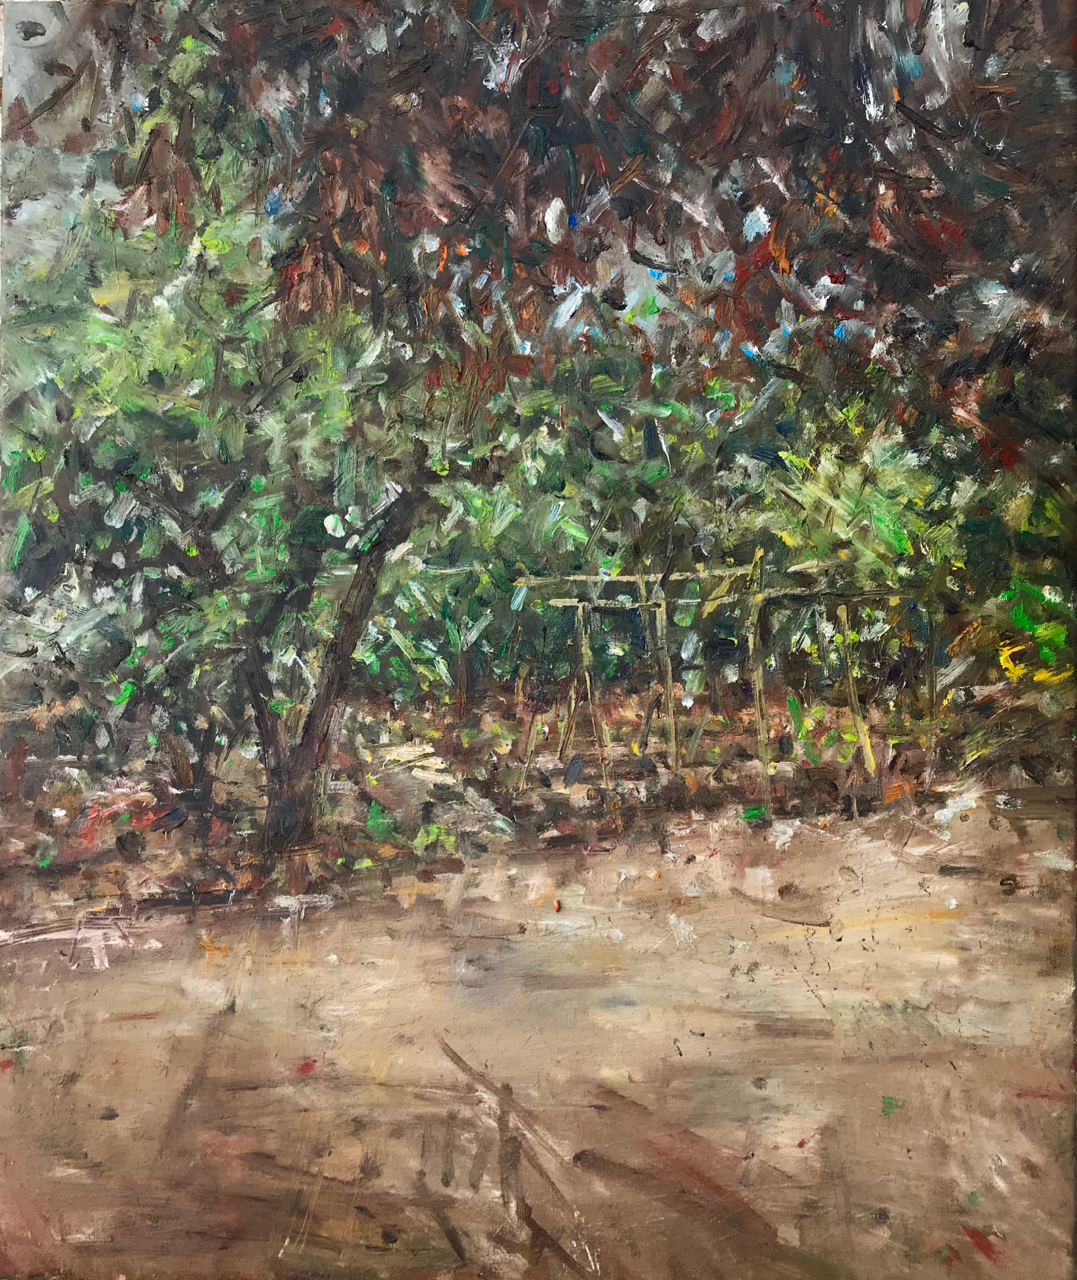 Garden from my patio. (March 2020) Oil on canvas